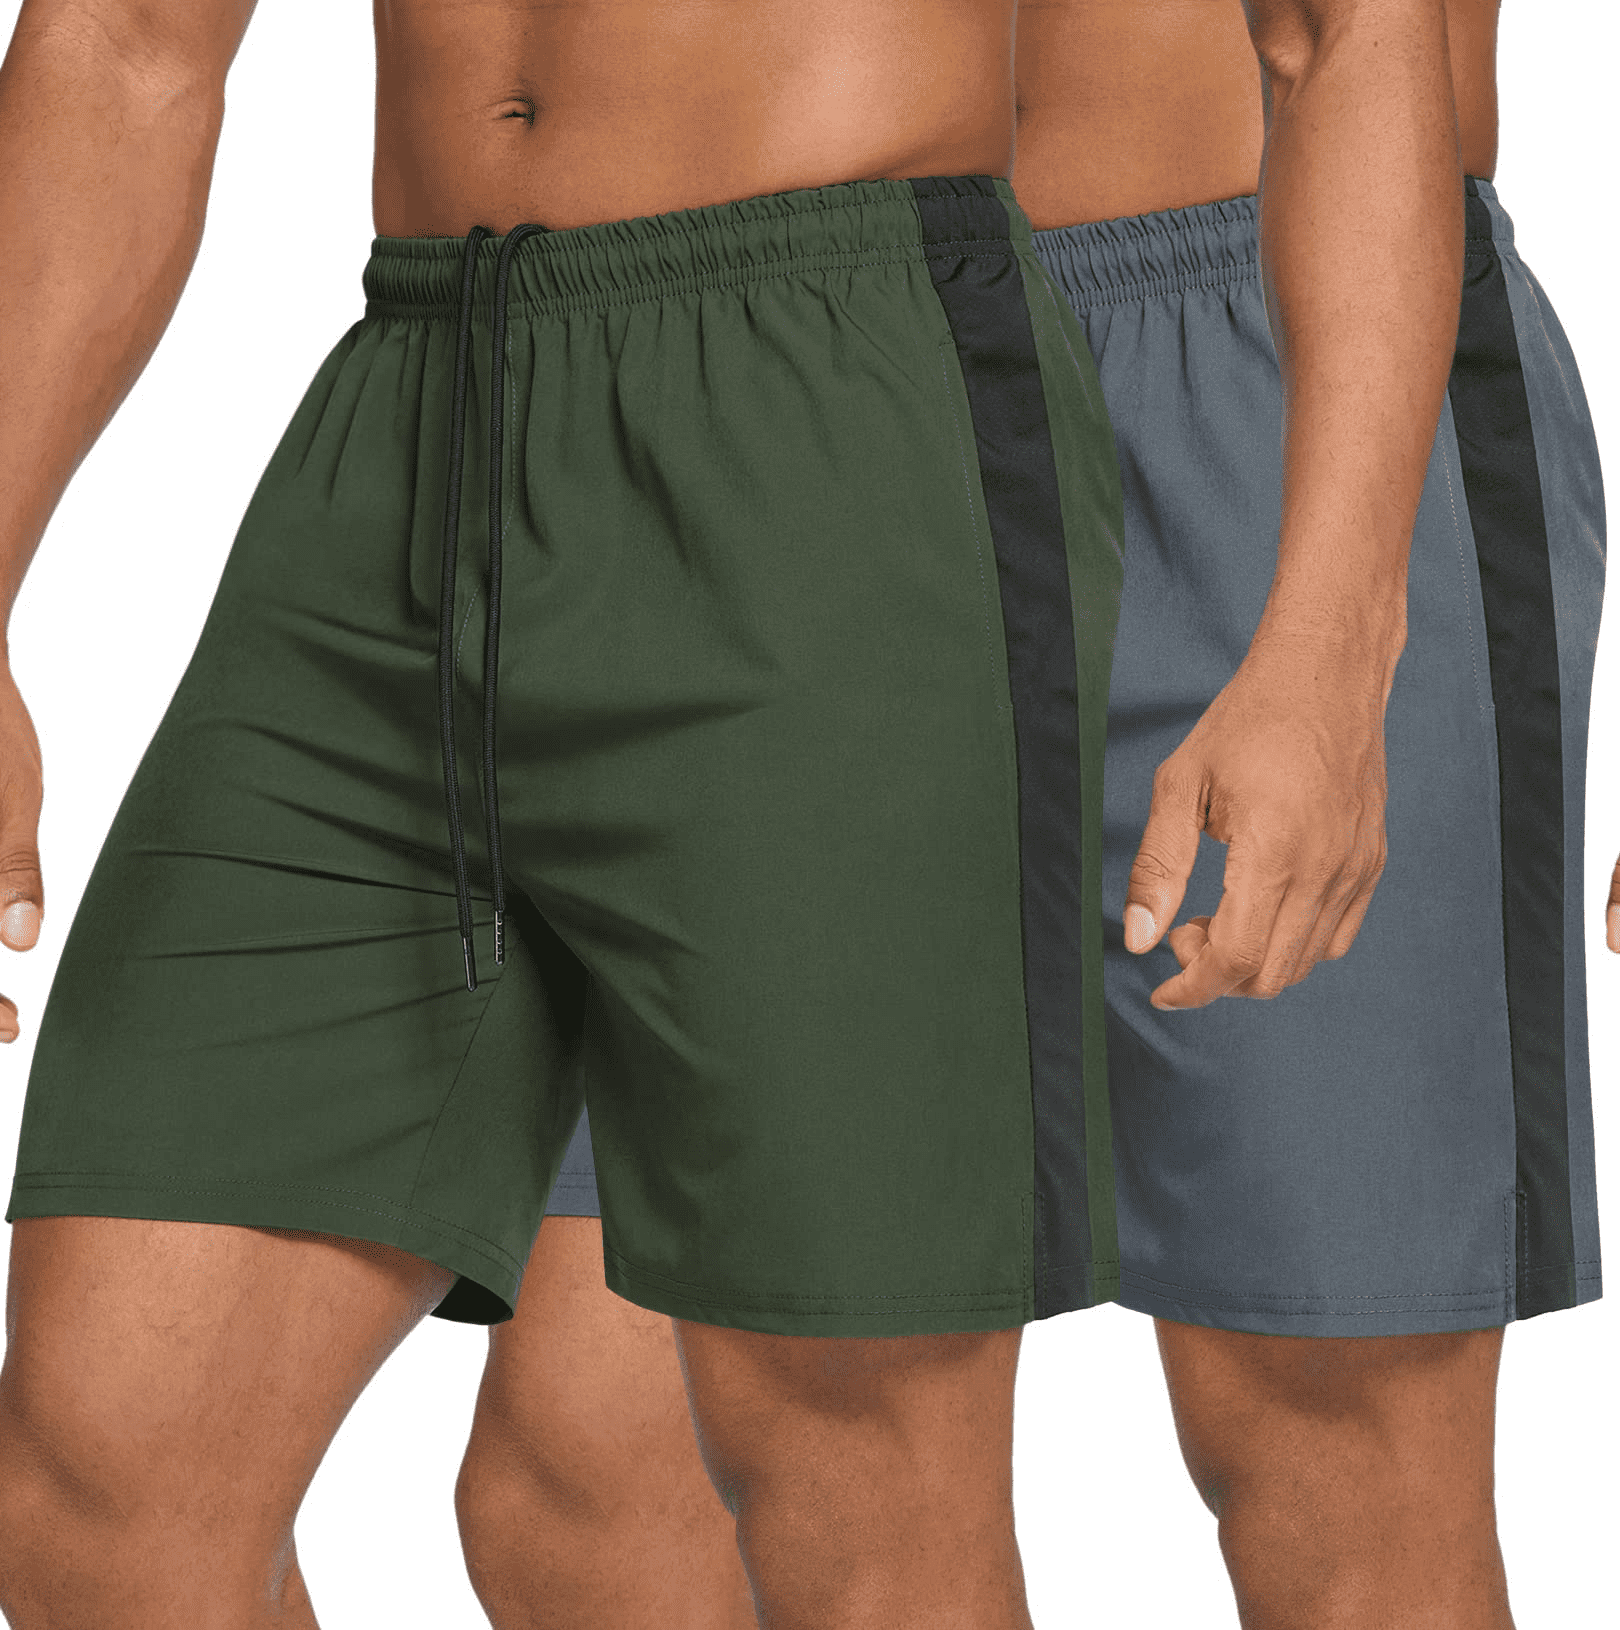 COOFANDY Men's 2 Pack Workout Shorts 7'' Cotton Gym Shorts Athletic Running Bodybuilding Training Jogger with Pockets